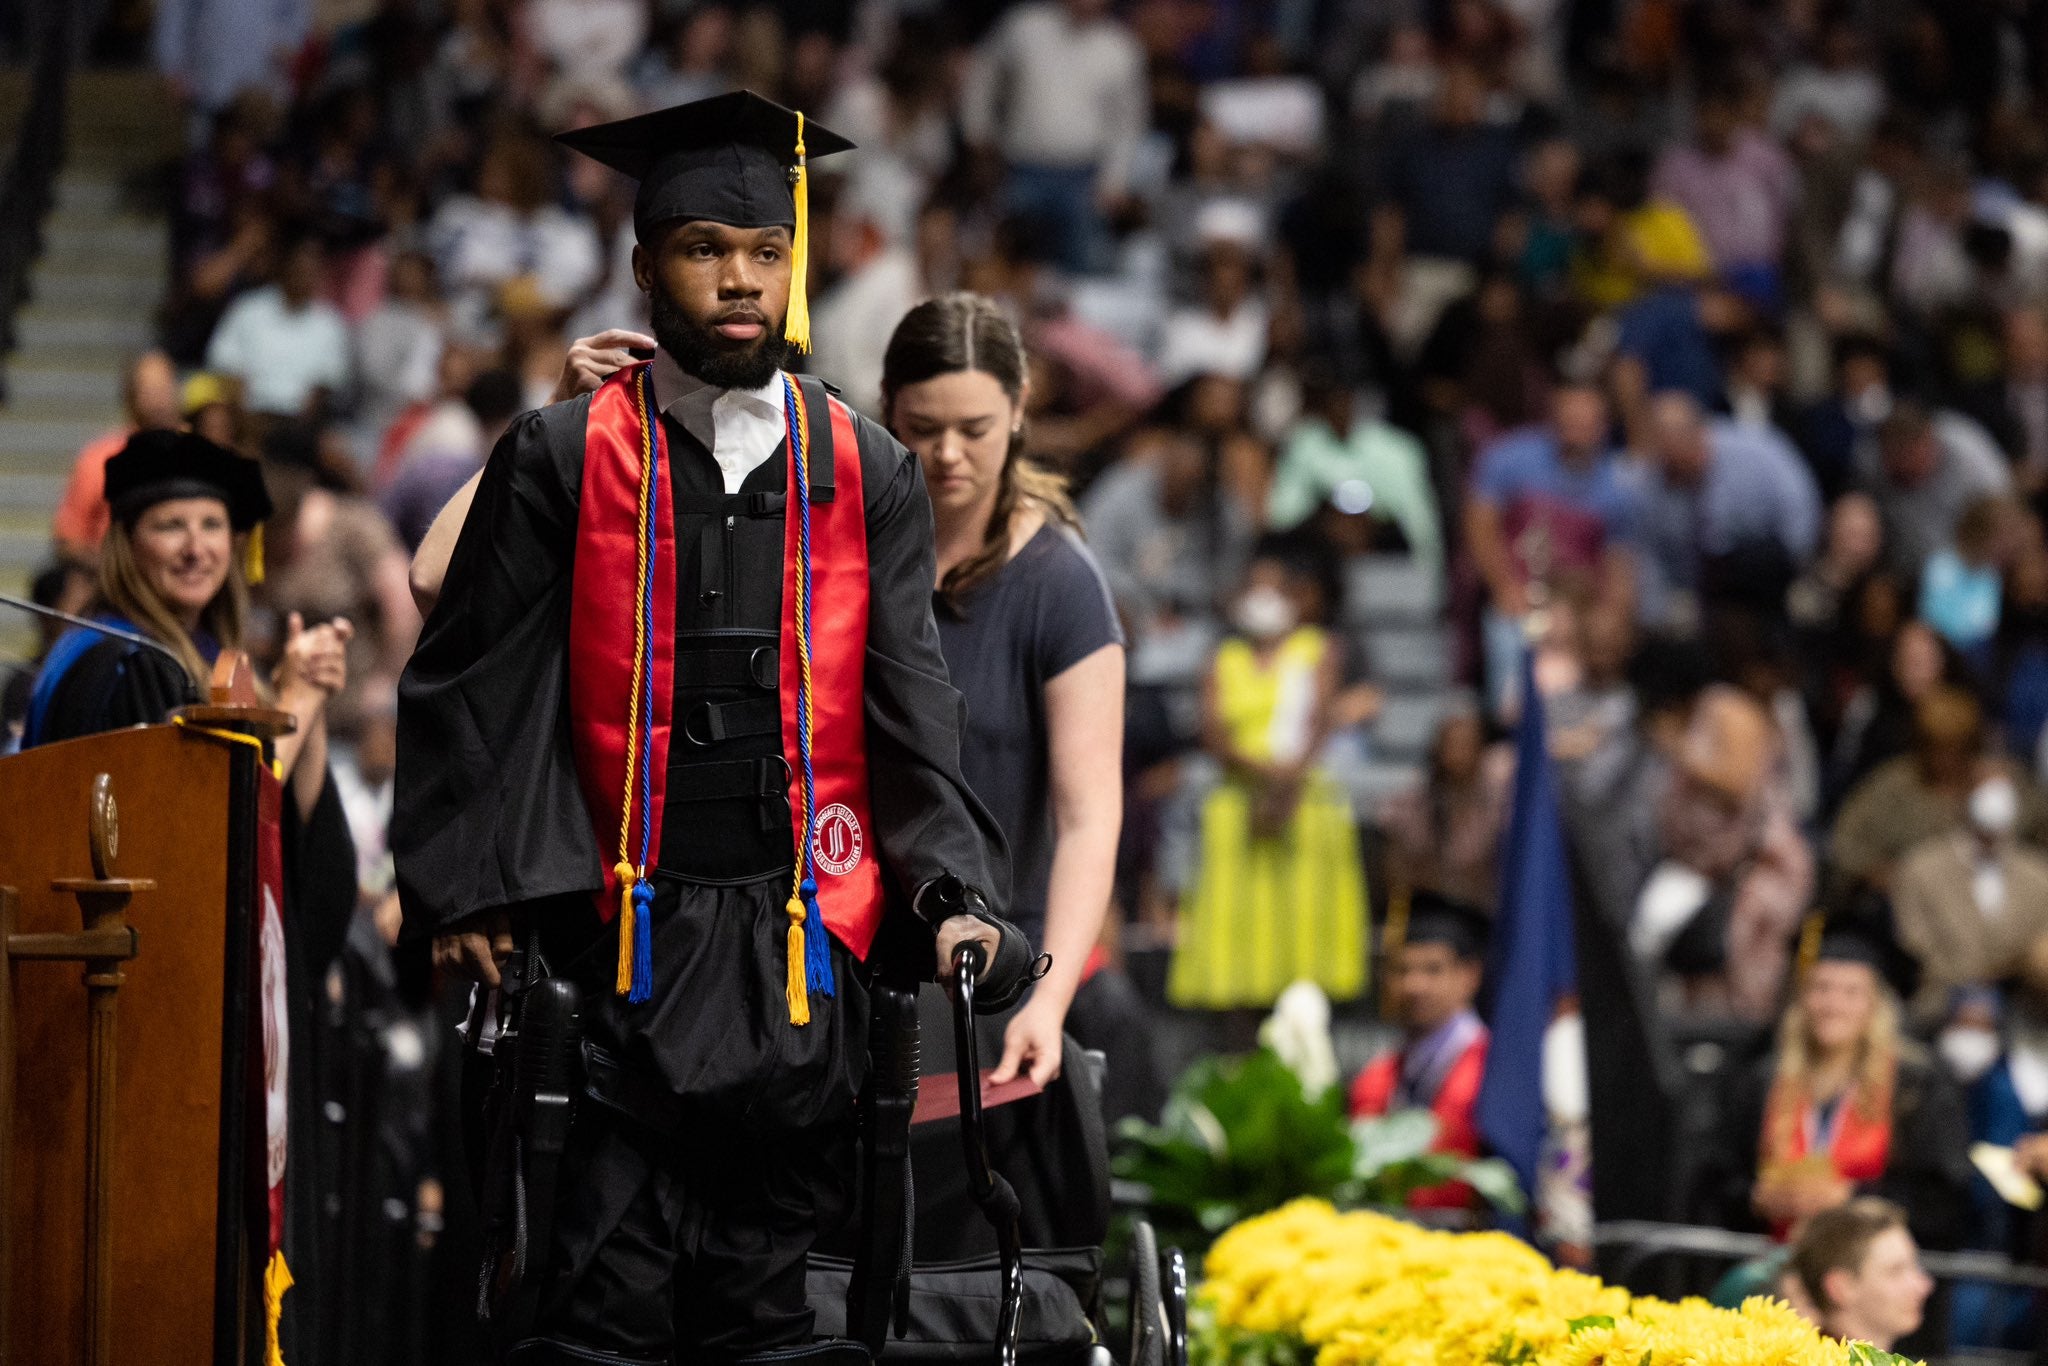 "Anything Is Possible": Paralyzed Student Walks Across Stage At College Graduation